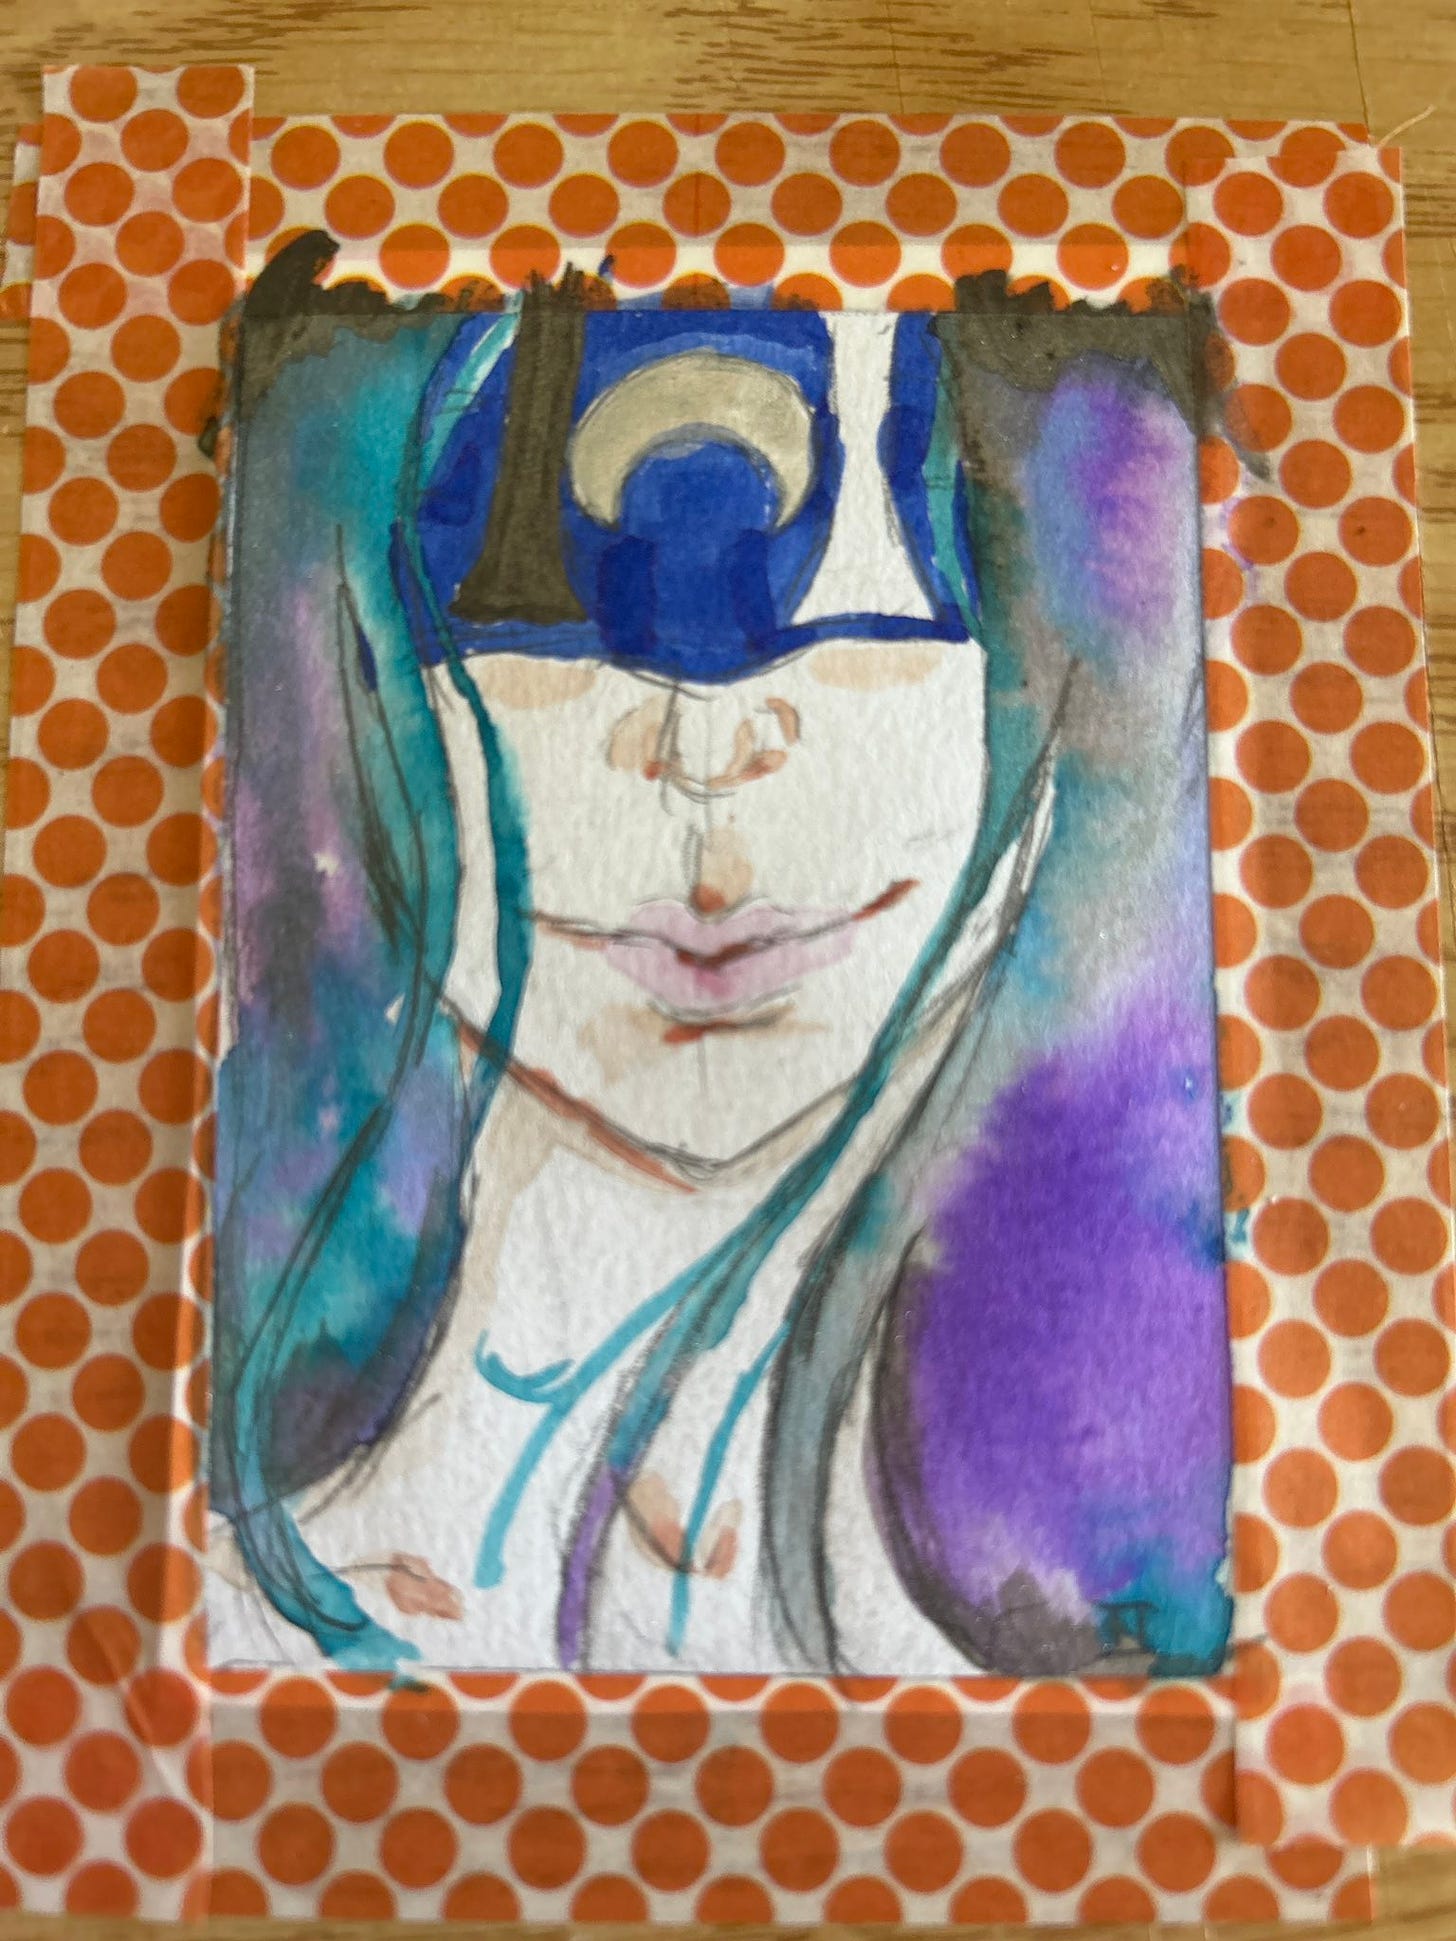 a watercolor painting of a woman. She smiles slightly. she is blindfolded and her hair is violet, aqua, and black. Her blondfold is blue and has a crescent moon and two pillars, one black and one blue, on it